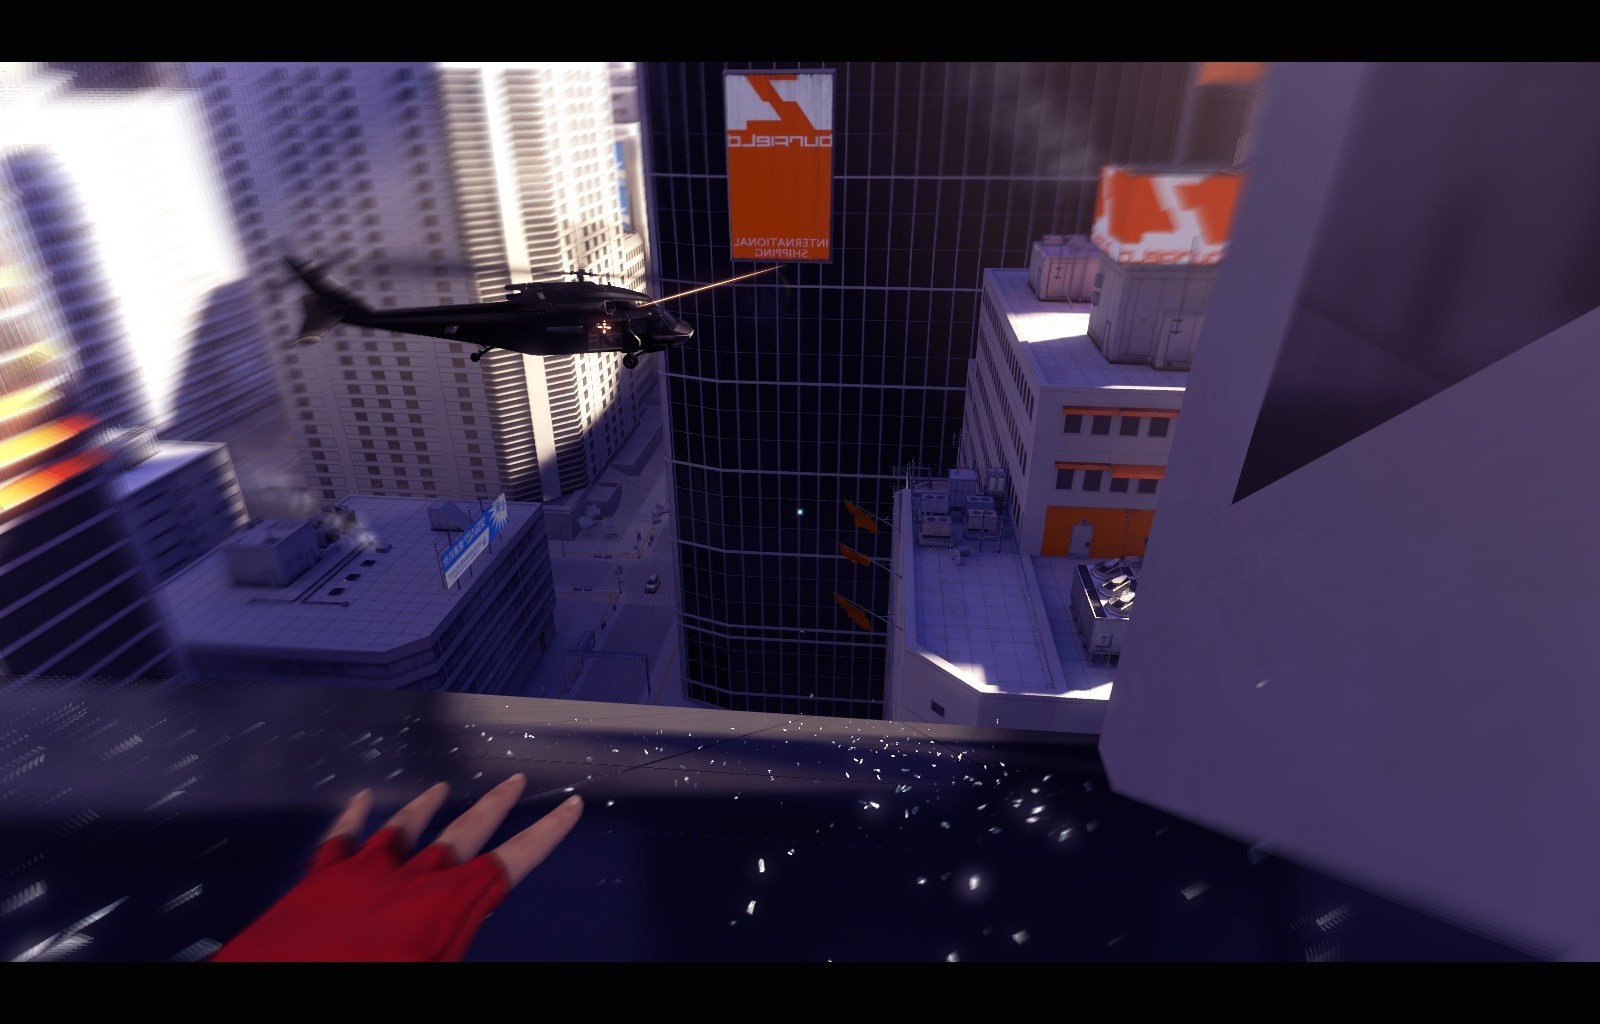 screenshots, Video Games, Mirrors Edge, Helicopters, City, Flag, Advertisements, Gun, Sikorsky UH 60 Black Hawk, Parkour Wallpaper